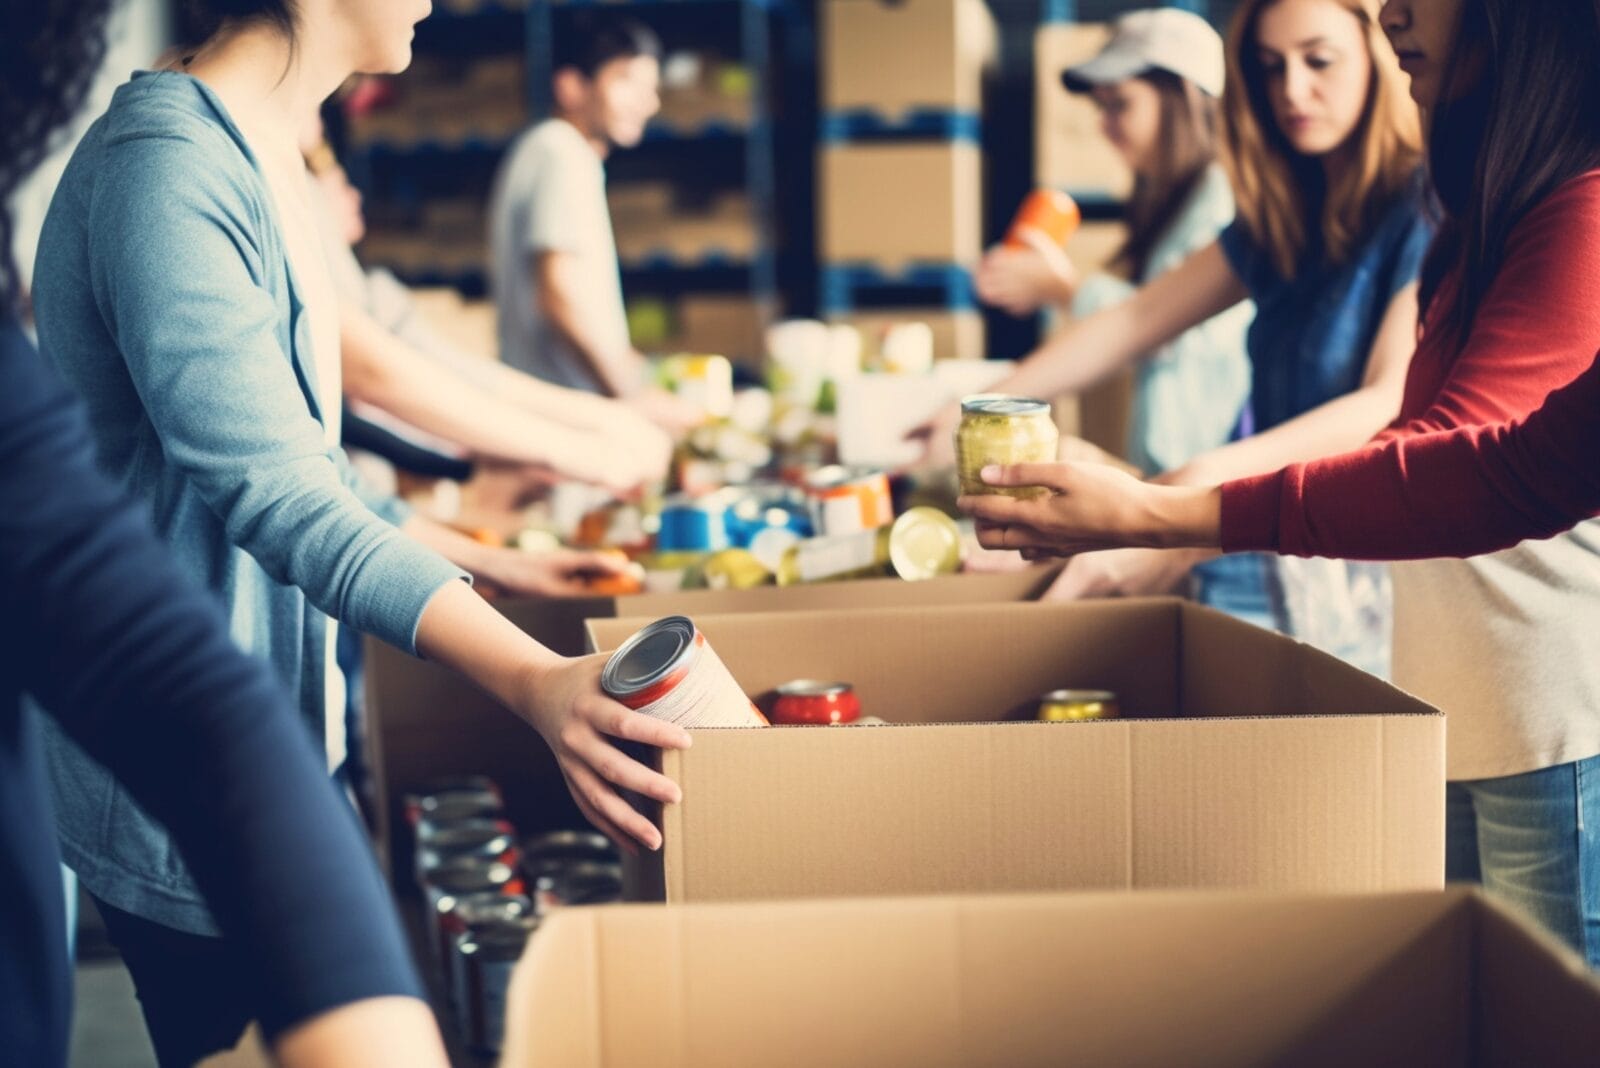 Volunteers sorting canned goods at a community food bank